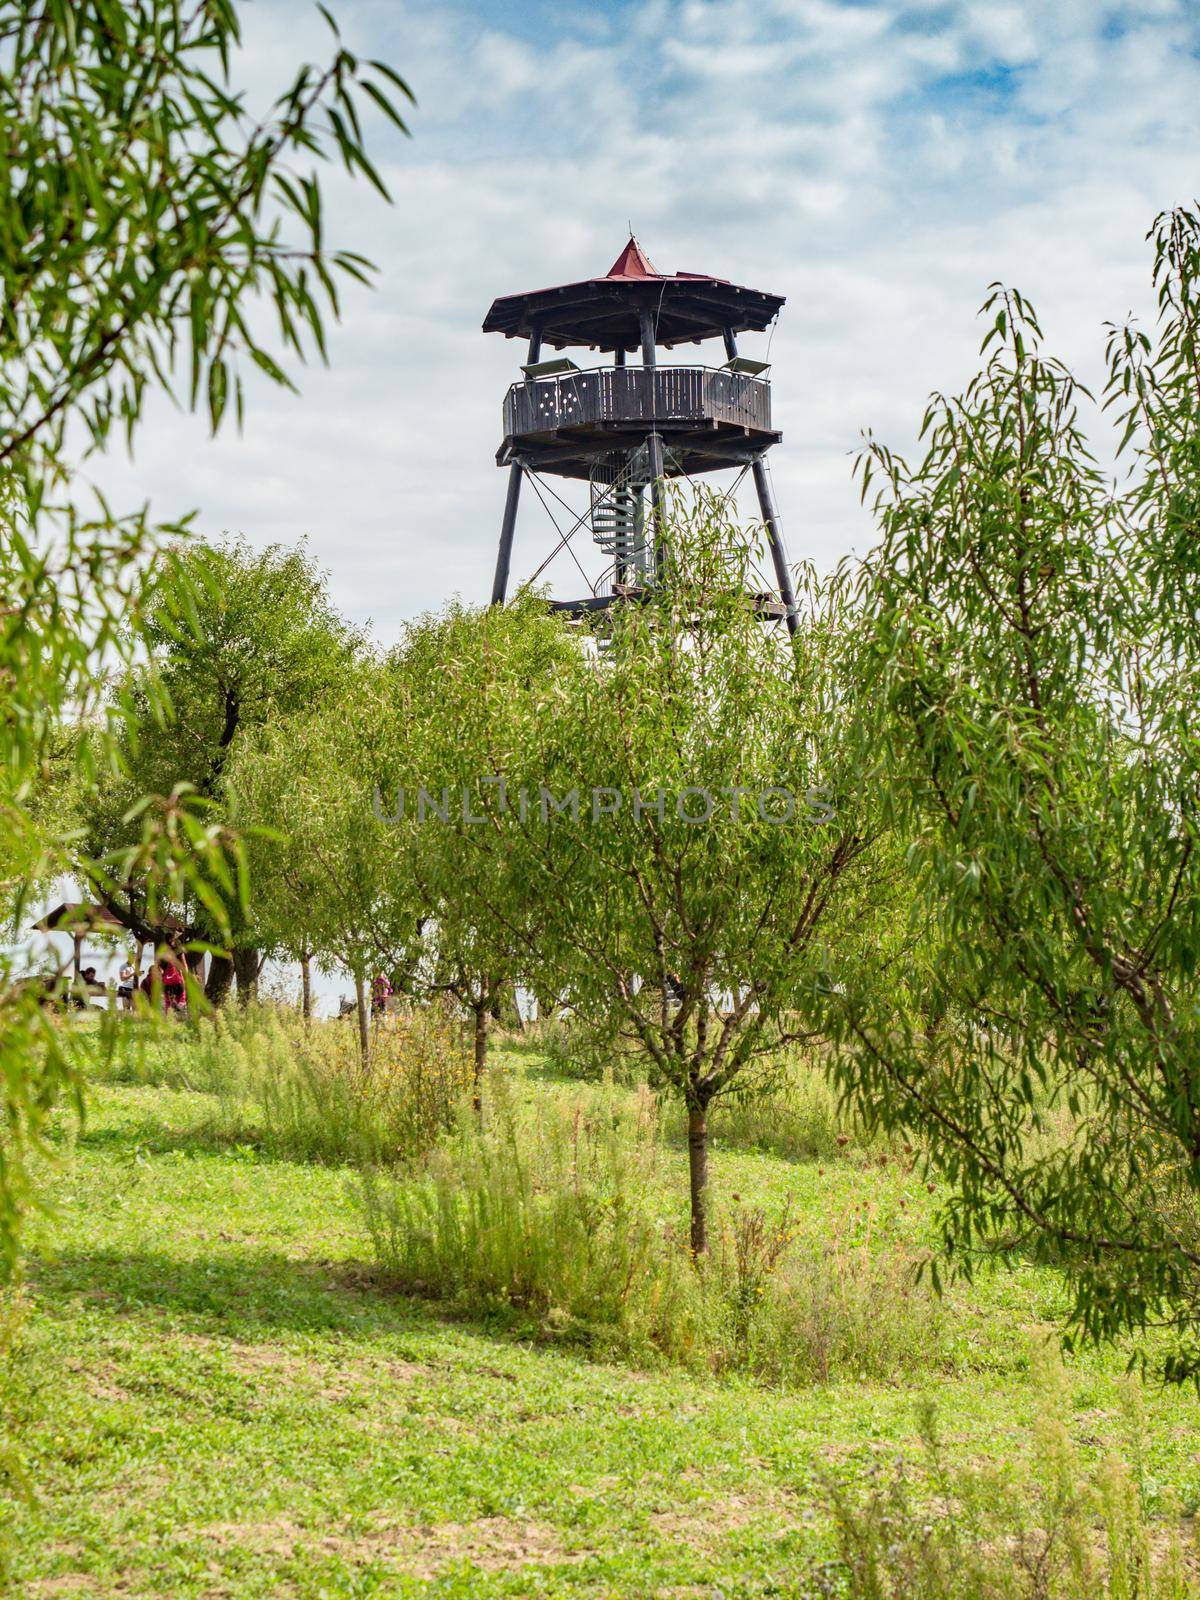 The lookout tower in the Mandlonove sady , almond orchard at Hustopece town, Czech Republic. The history of almond growing in our territory dates back to the 17th century.